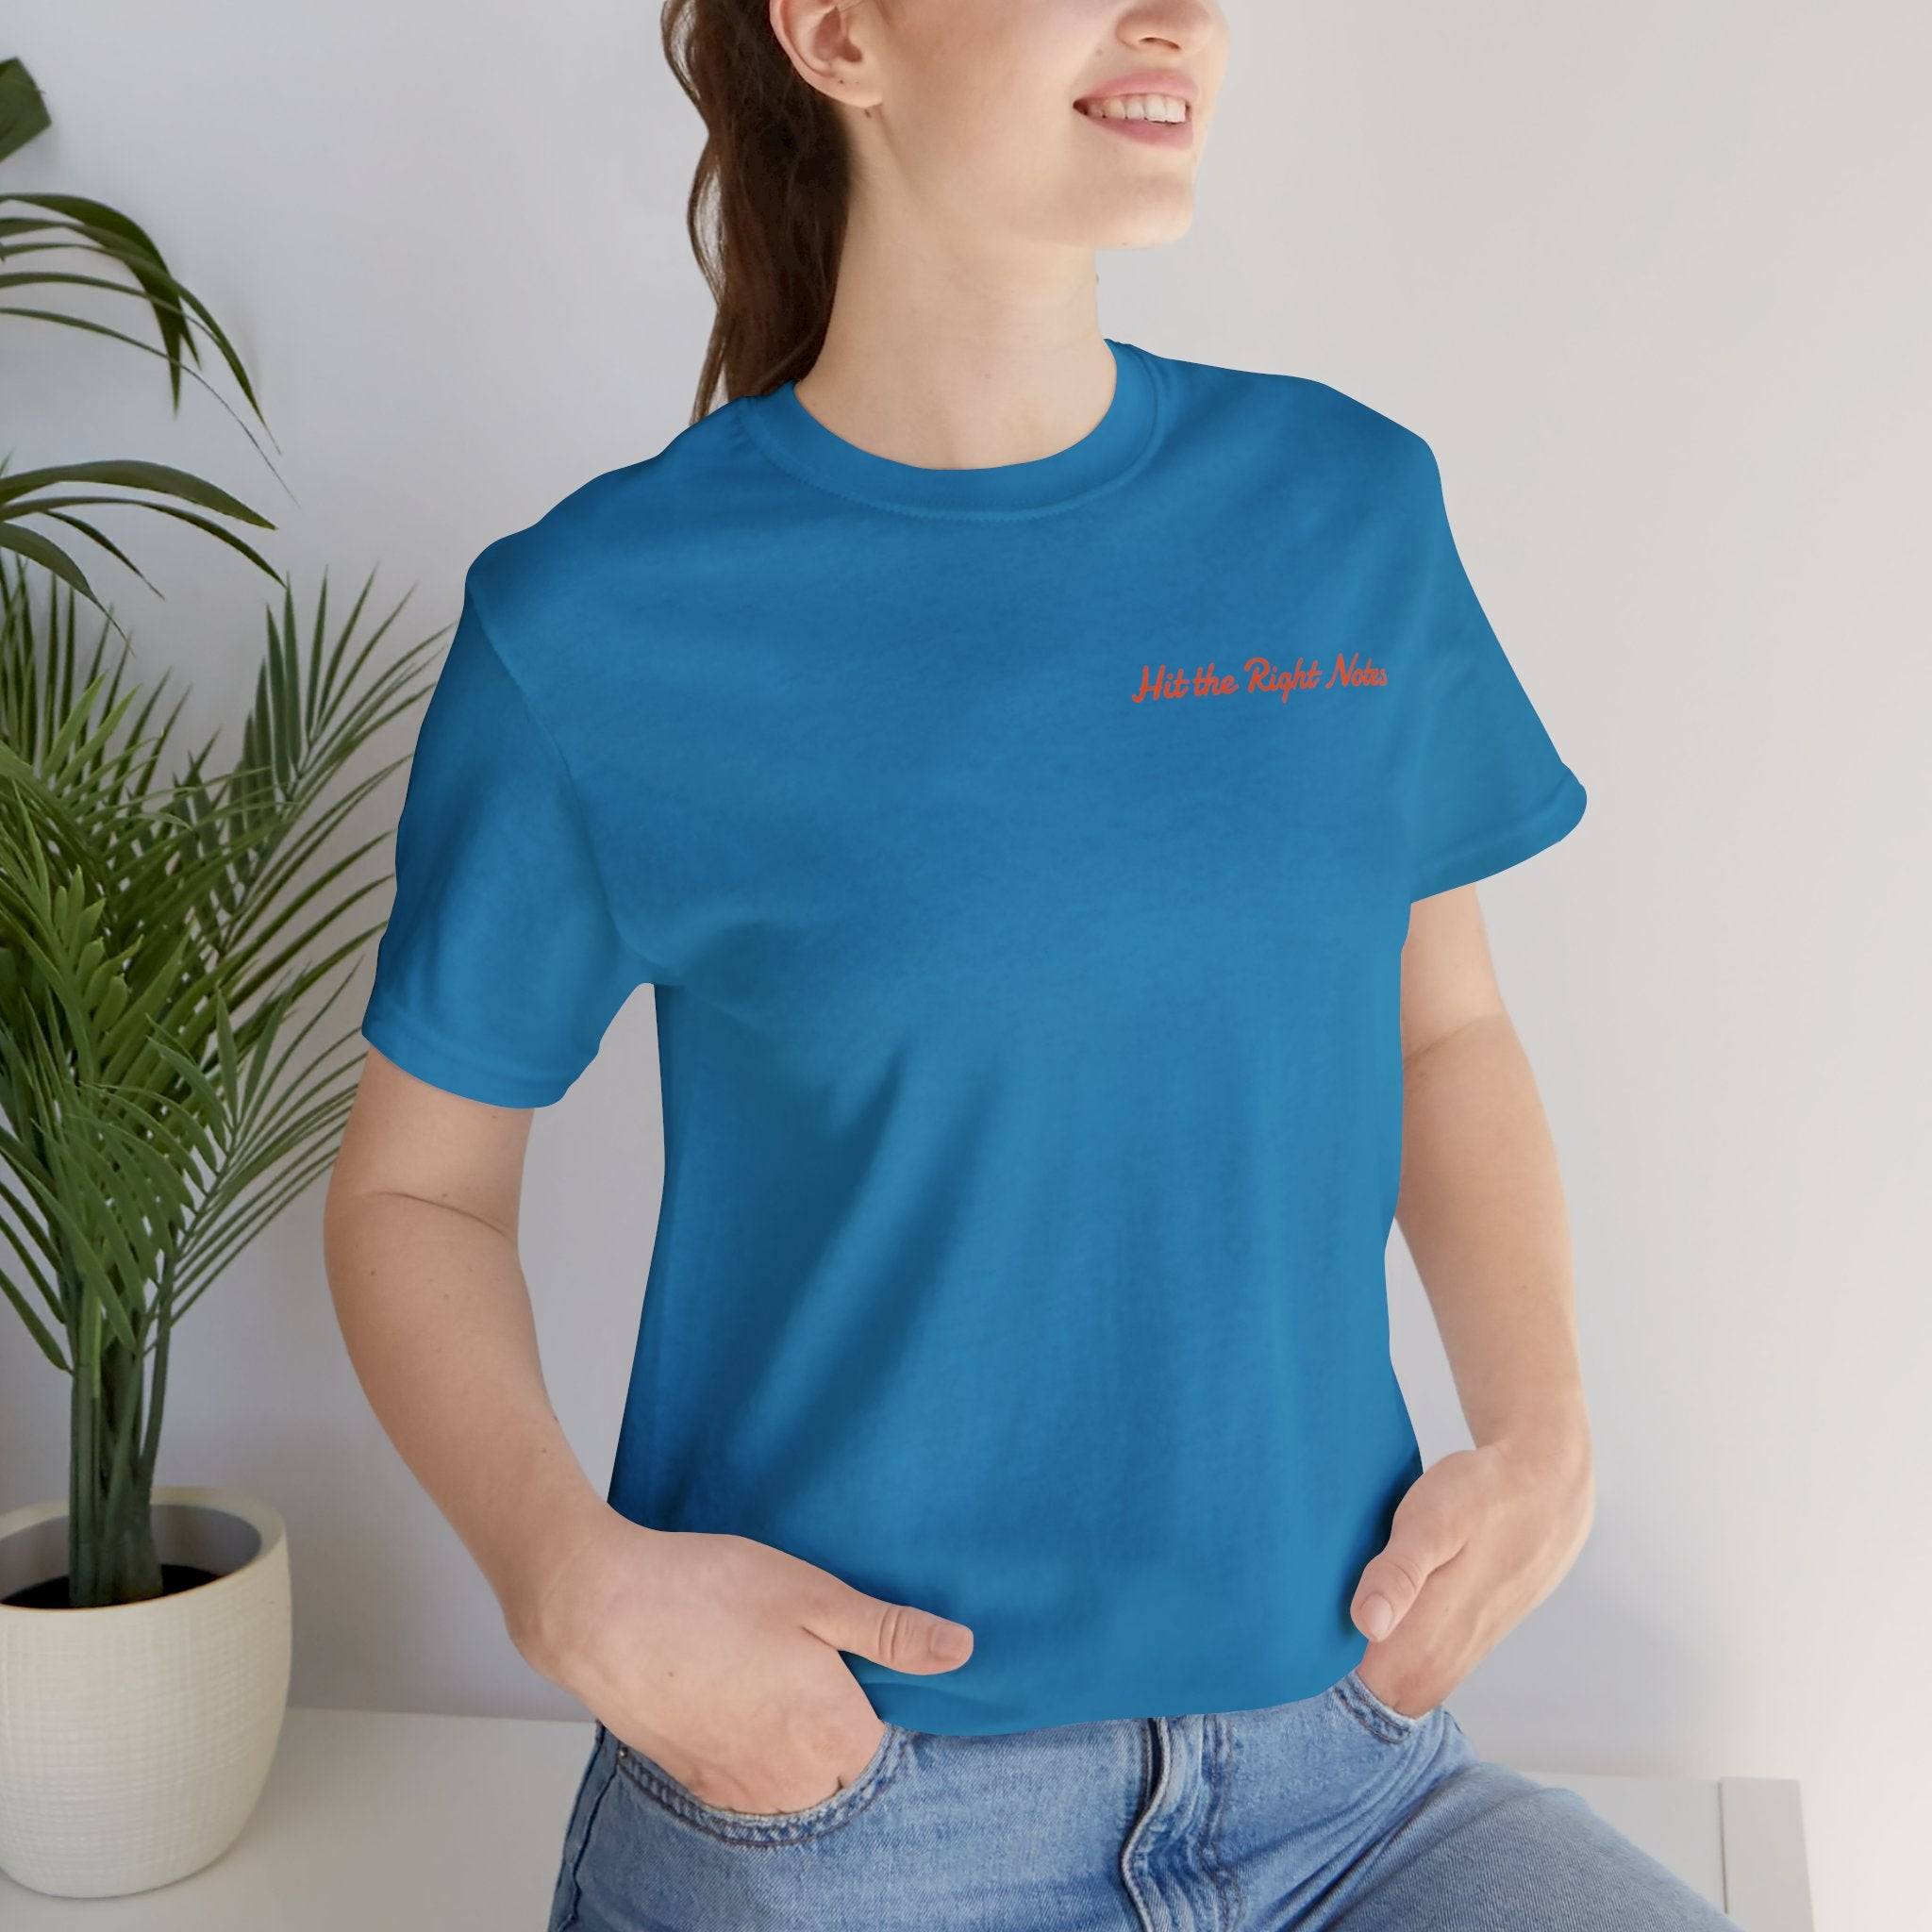 Hit the Right Notes Jersey Tee - Bella+Canvas 3001 Heather Mauve Classic Tee Comfortable Tee Cotton T-Shirt Graphic Tee JerseyTee Statement Shirt T-shirt Tee Unisex Apparel T-Shirt 12405518563487197035_2048_35f89fd8-e089-4f19-8423-92b52265f479 Printify